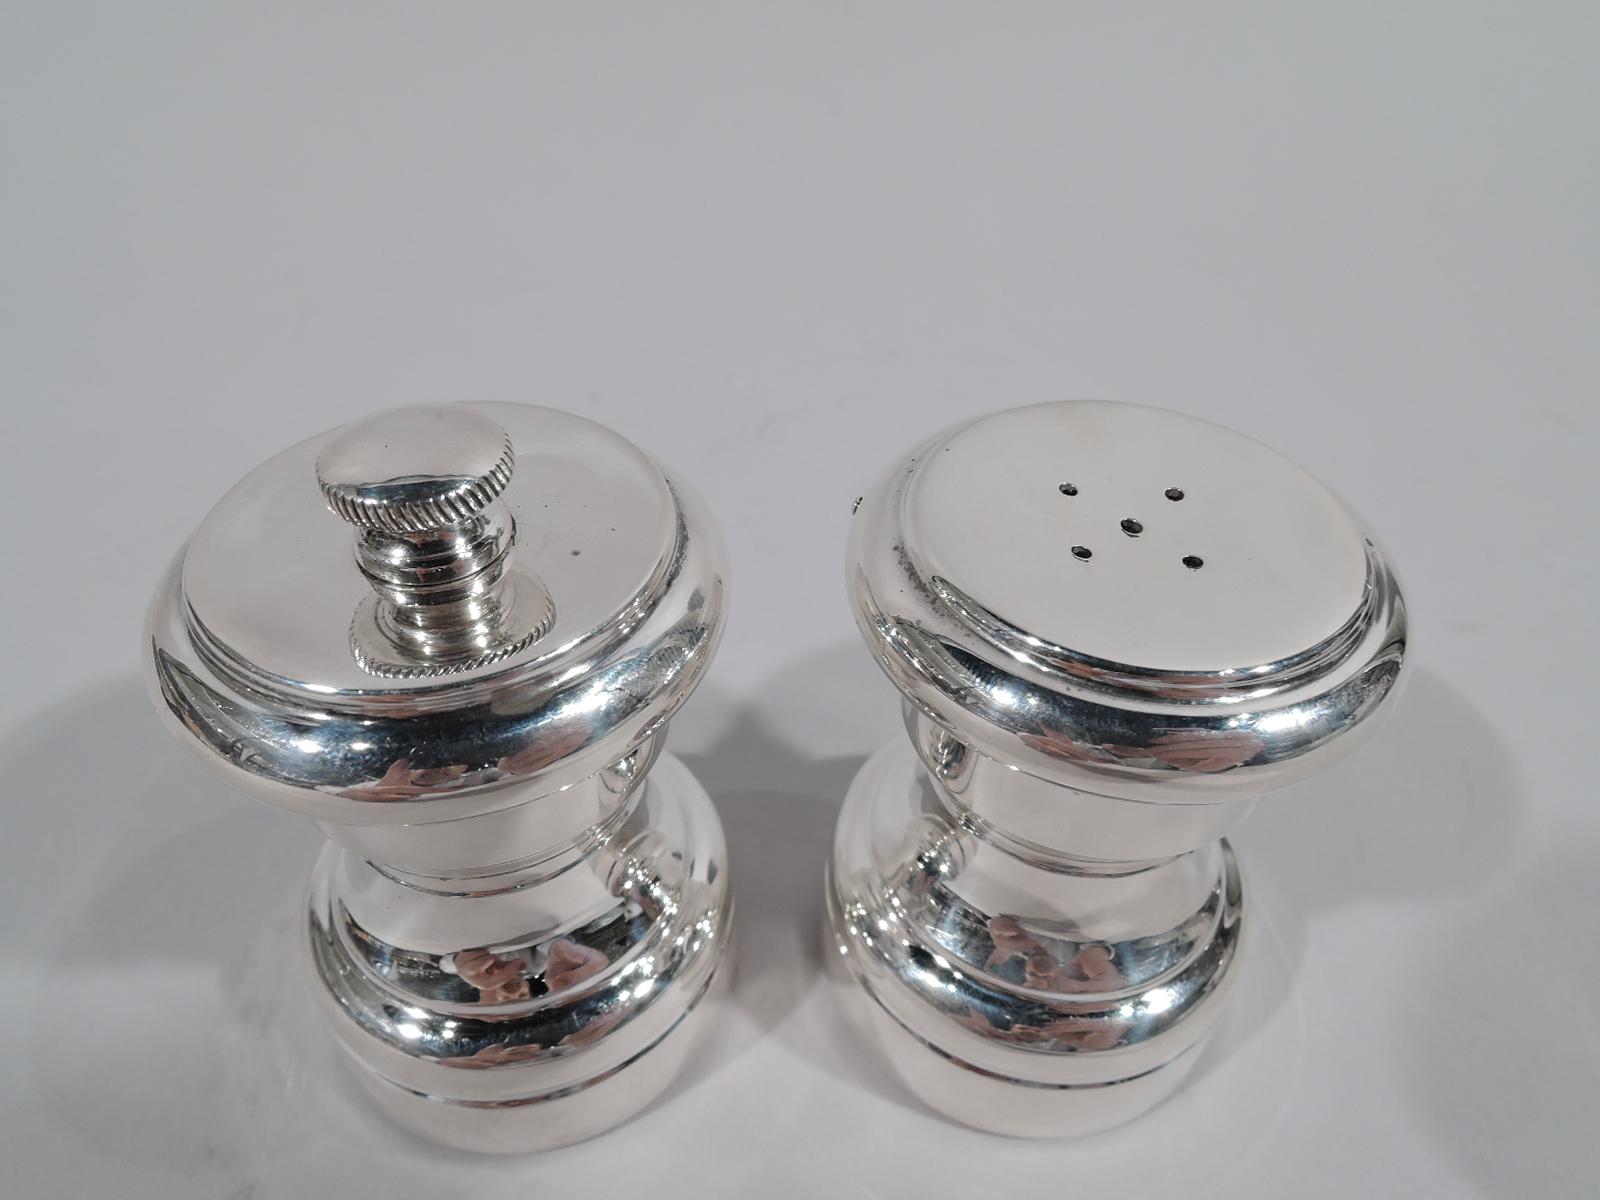 Pair of Modern sterling silver salt shaker and pepper mill. Retailed by Tiffany & Co. in New York. Each: Spool form with flat bellied top. Salt top pierced. Pepper top rotates with threaded finial. Both pieces fully marked including retailer’s